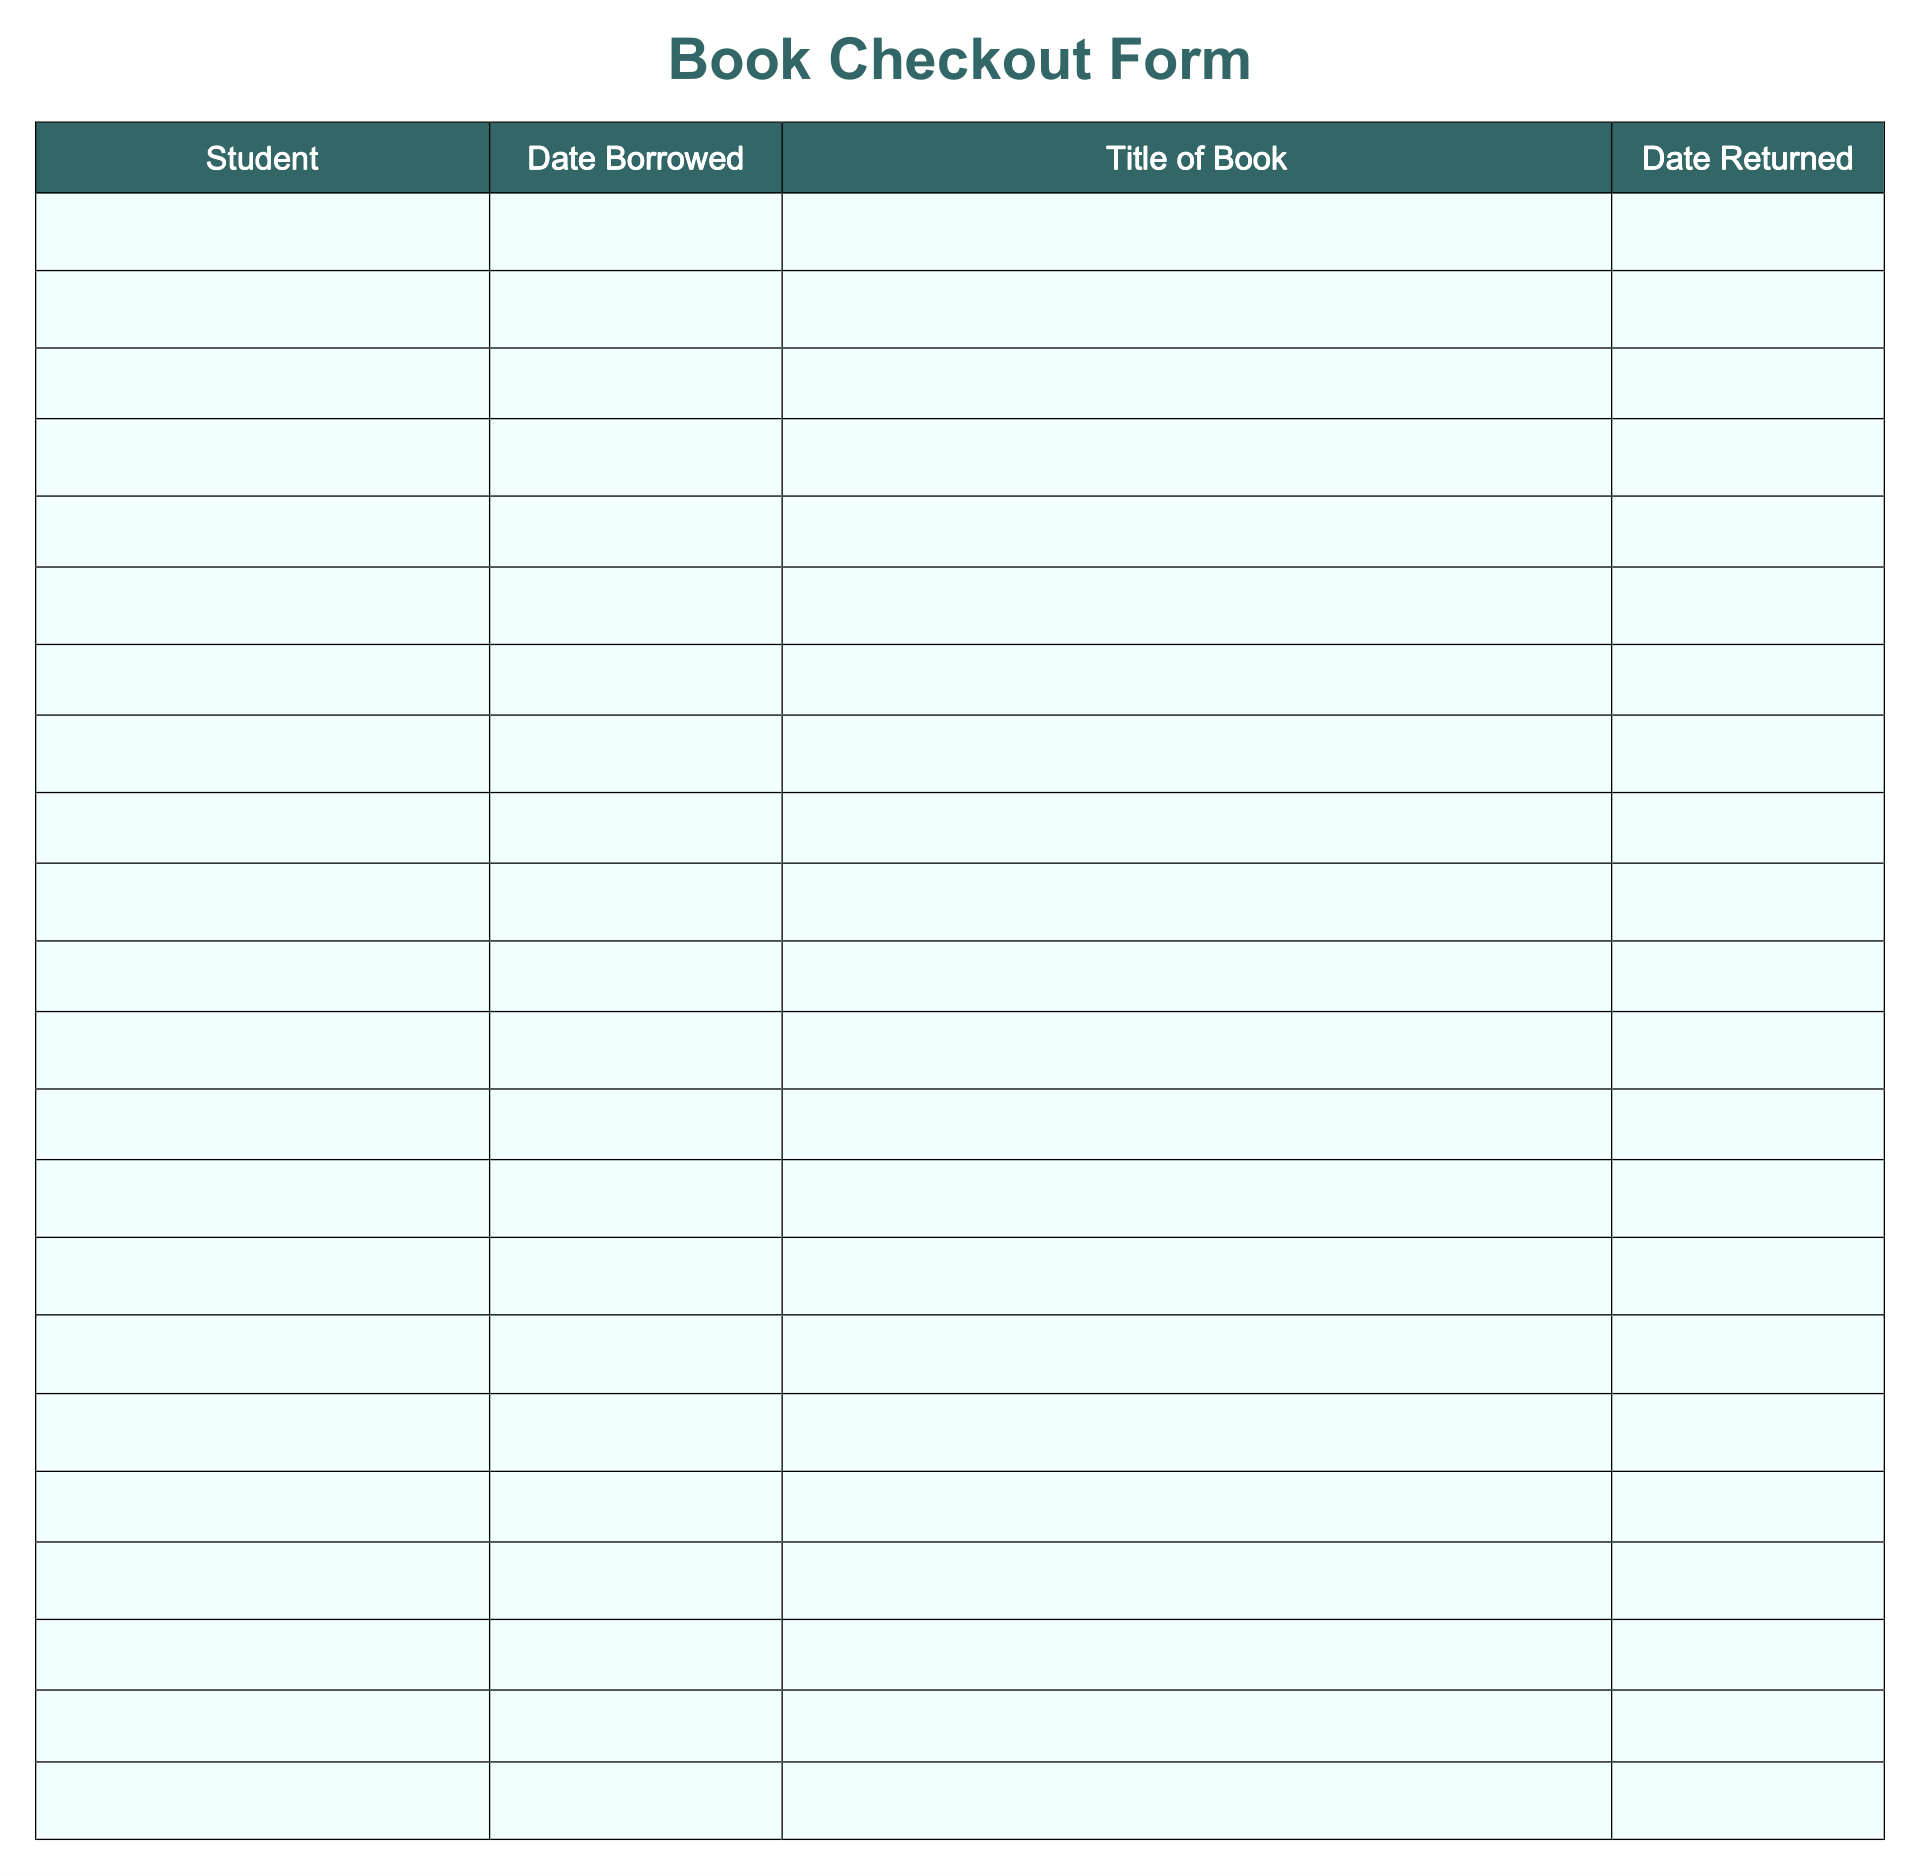 Employee Sign In And Out Sheet Template from www.printablee.com